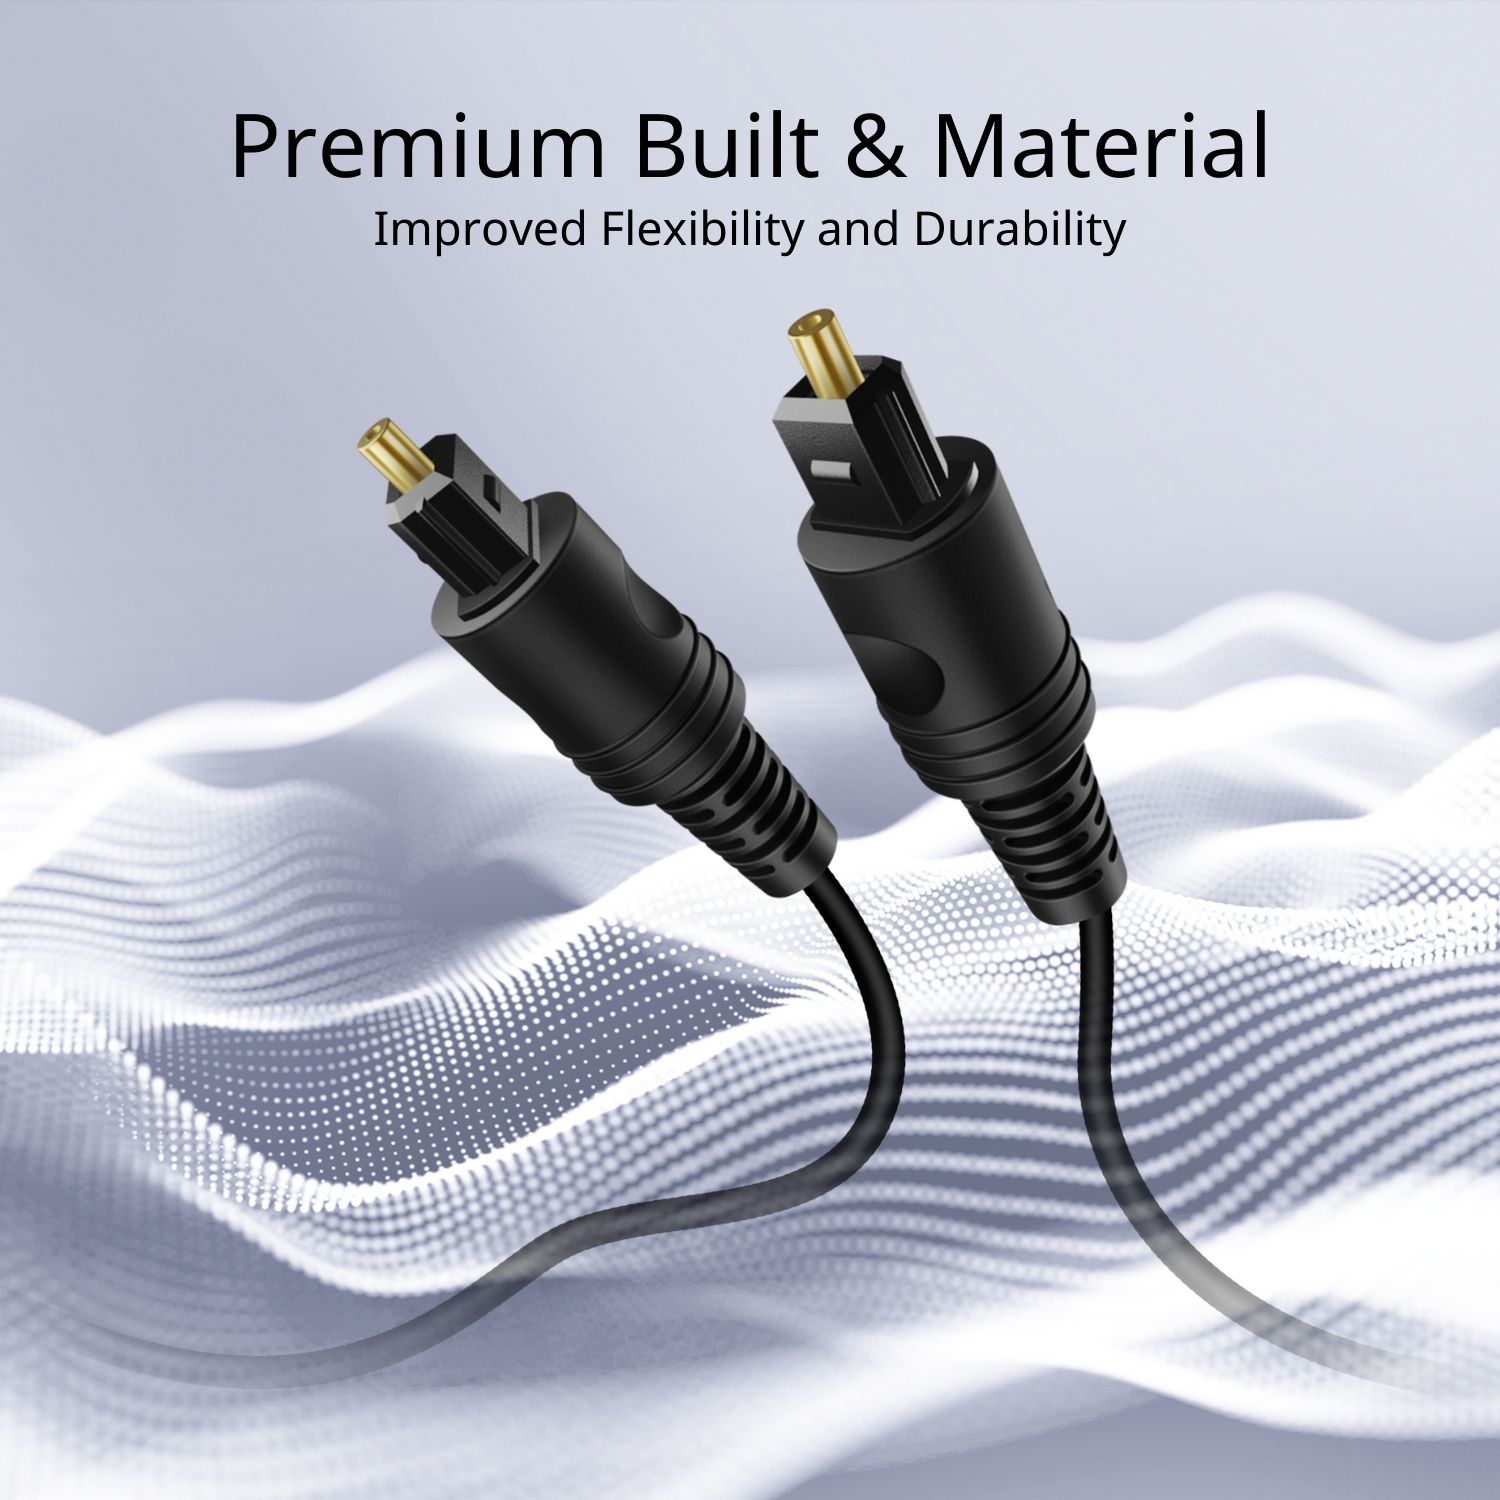 High Performance Gold-plated Digital Optical Cable Connectors - Resistant to weathering and delivers the cleanest possible signal even at extreme volume levels; Accurately transfer high bandwidth frequency quality detailed clean natural pure audio sound with realism and clarity jitter-free audio & S/PDIF (Sony/Philips Digital Interface) format signals